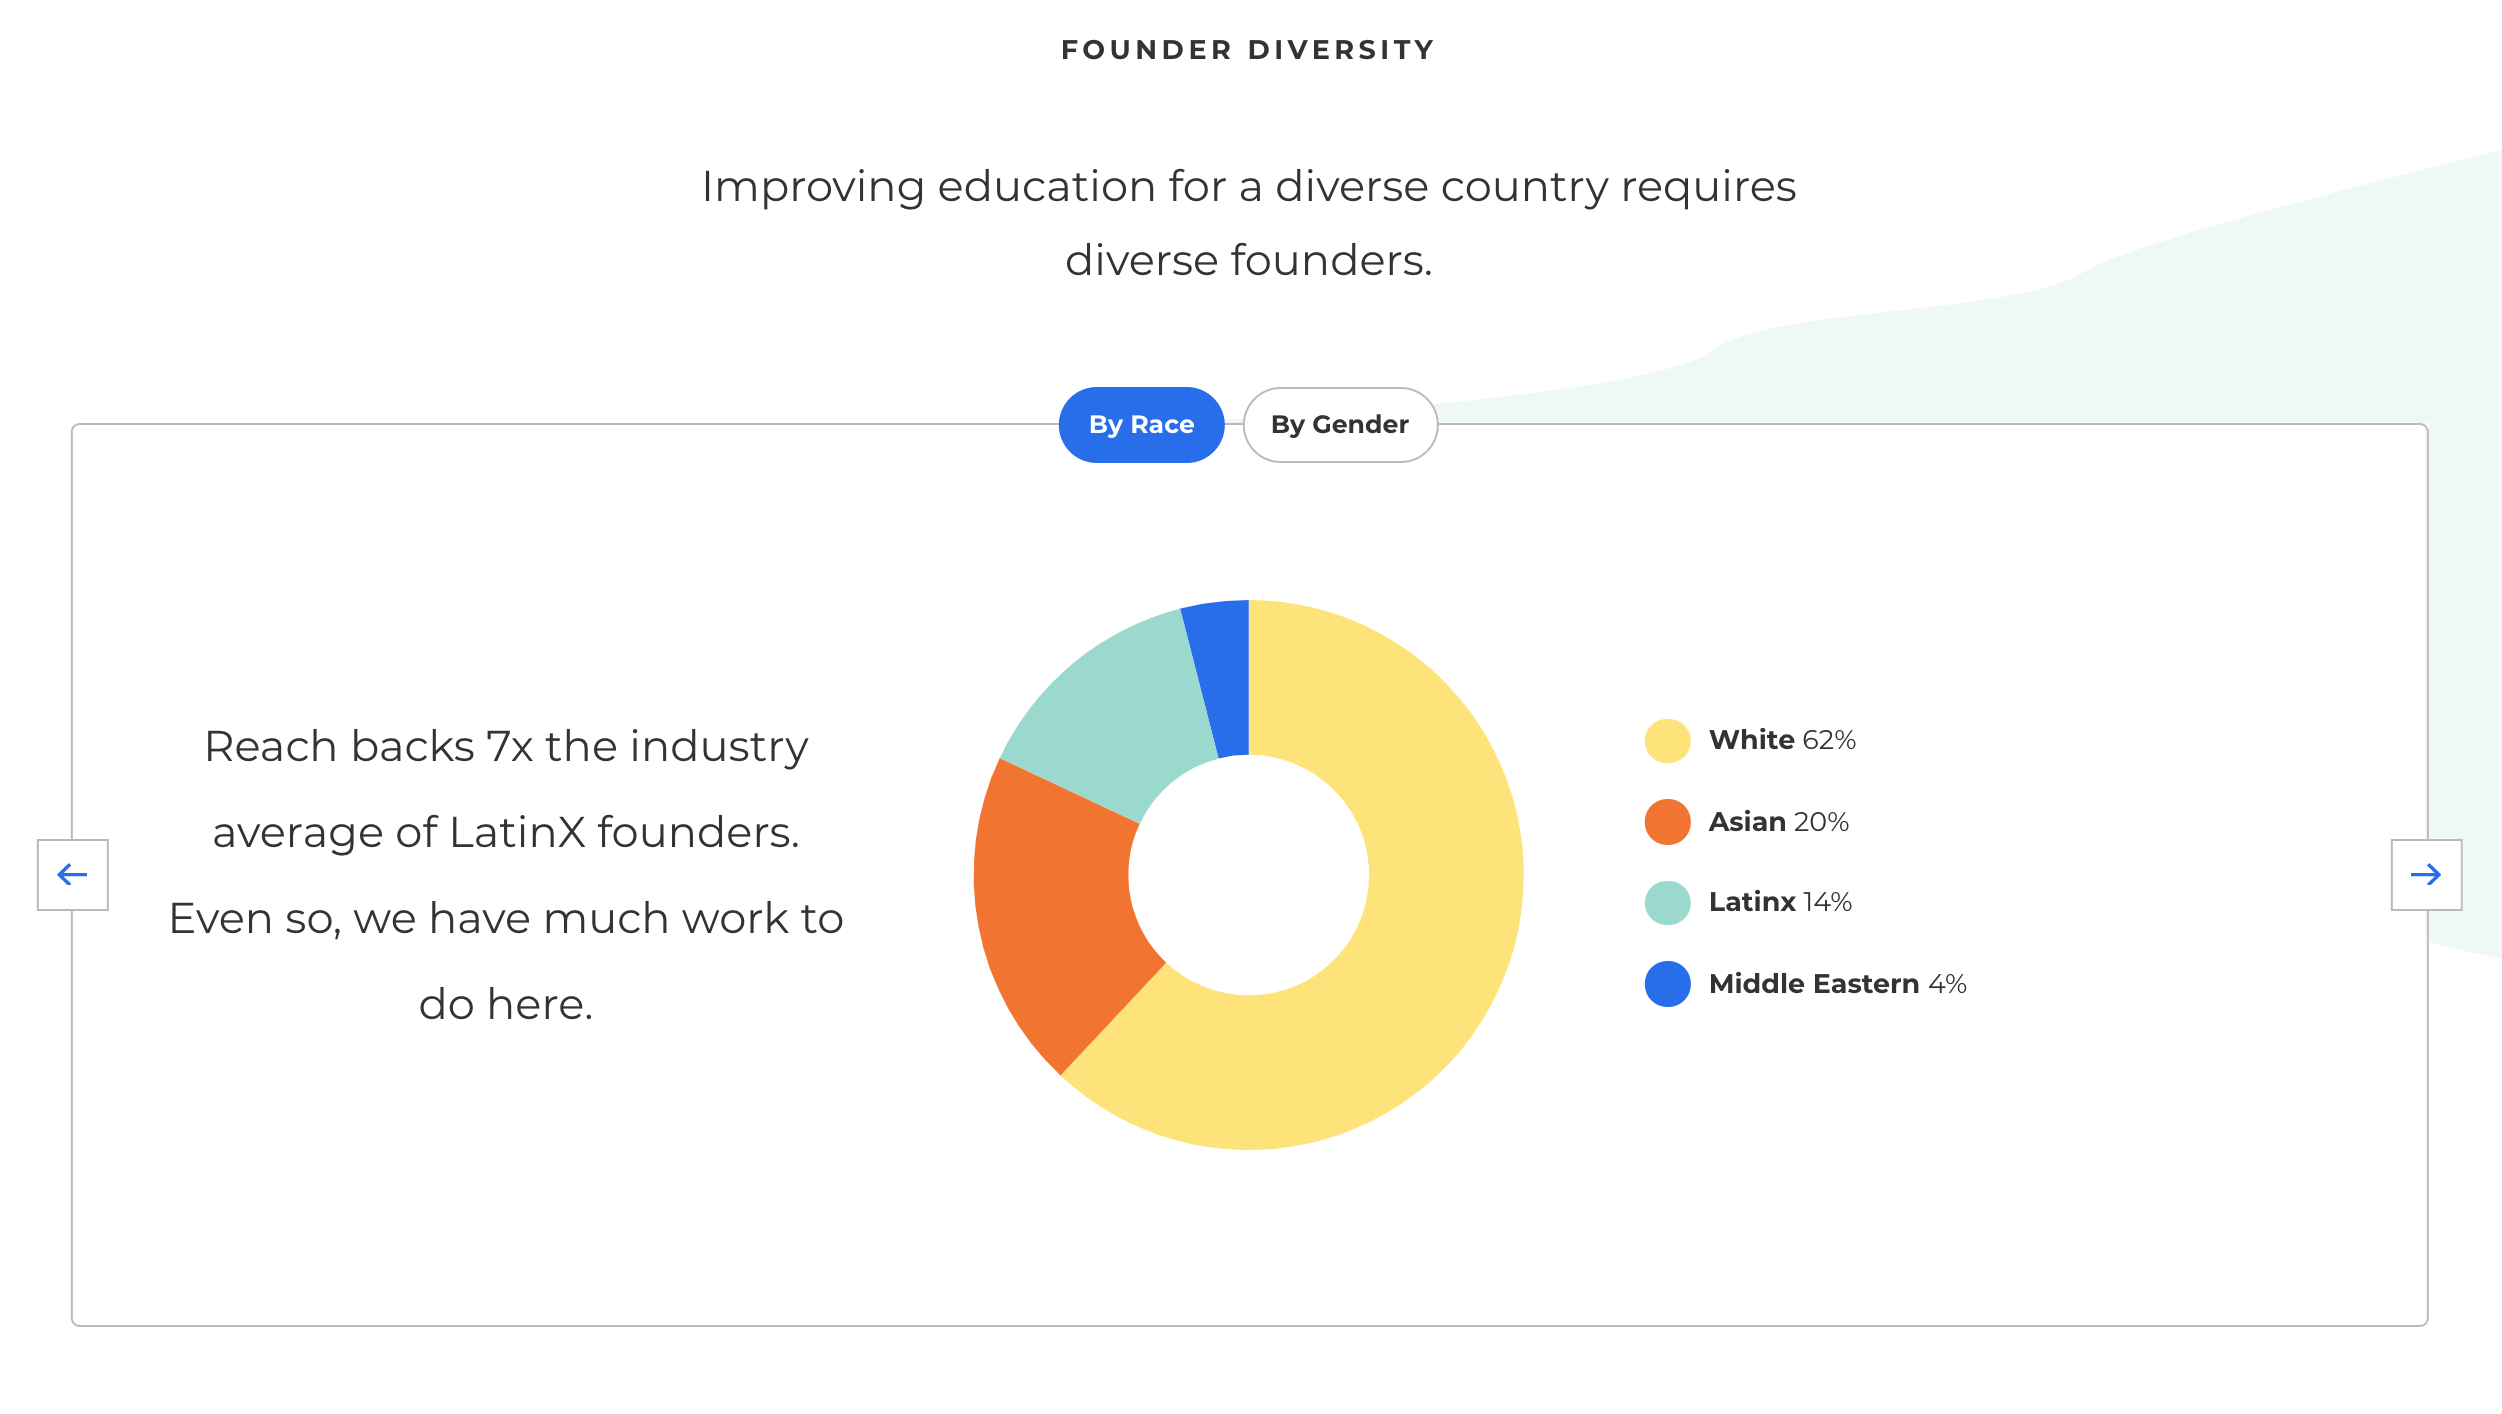 Pie chart showing founder ethnic diversity among grantees, with white at 62%, Asian 20%, Latinx 14%, and Middle Eastern 4%.